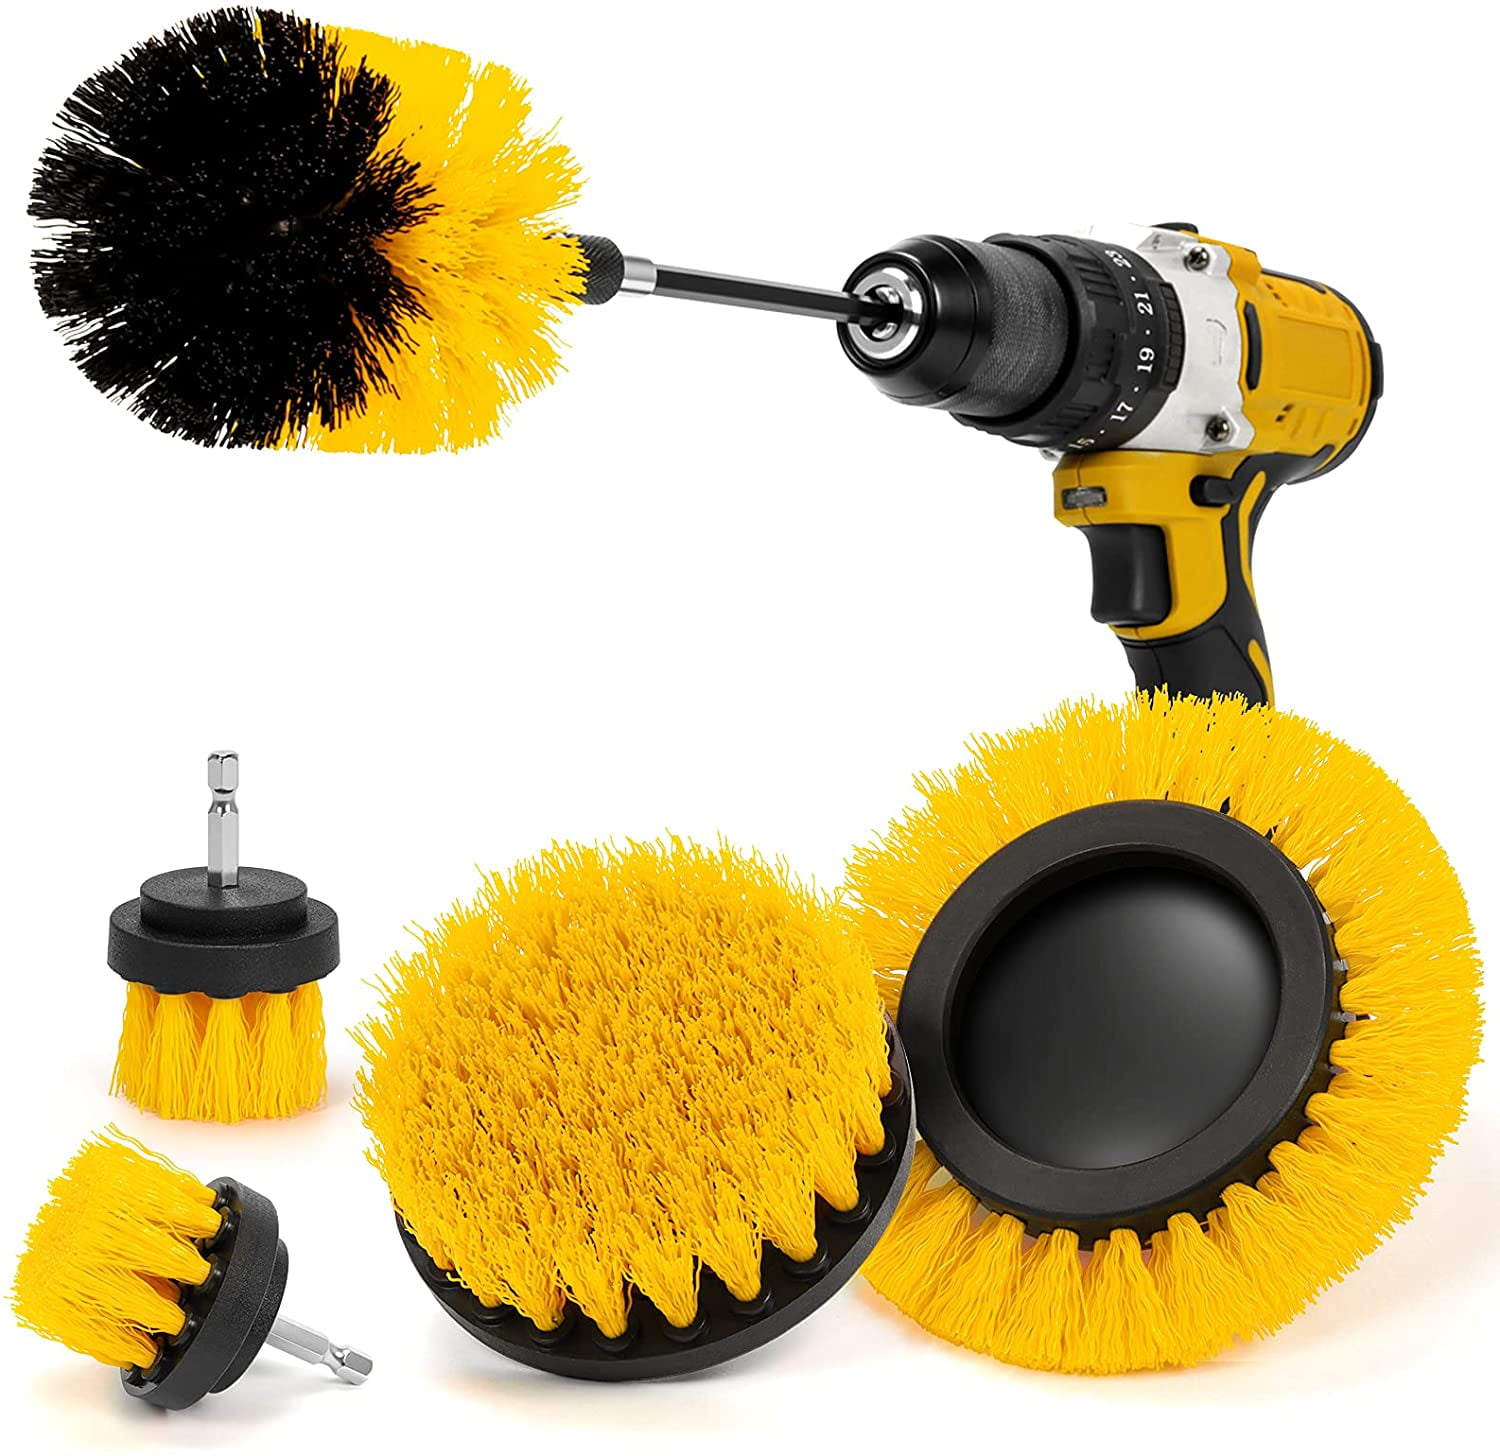 4PCS Drill Brush Tub Cleaner Grout Power Scrubber Cleaning Combo Tools Scrub Set 